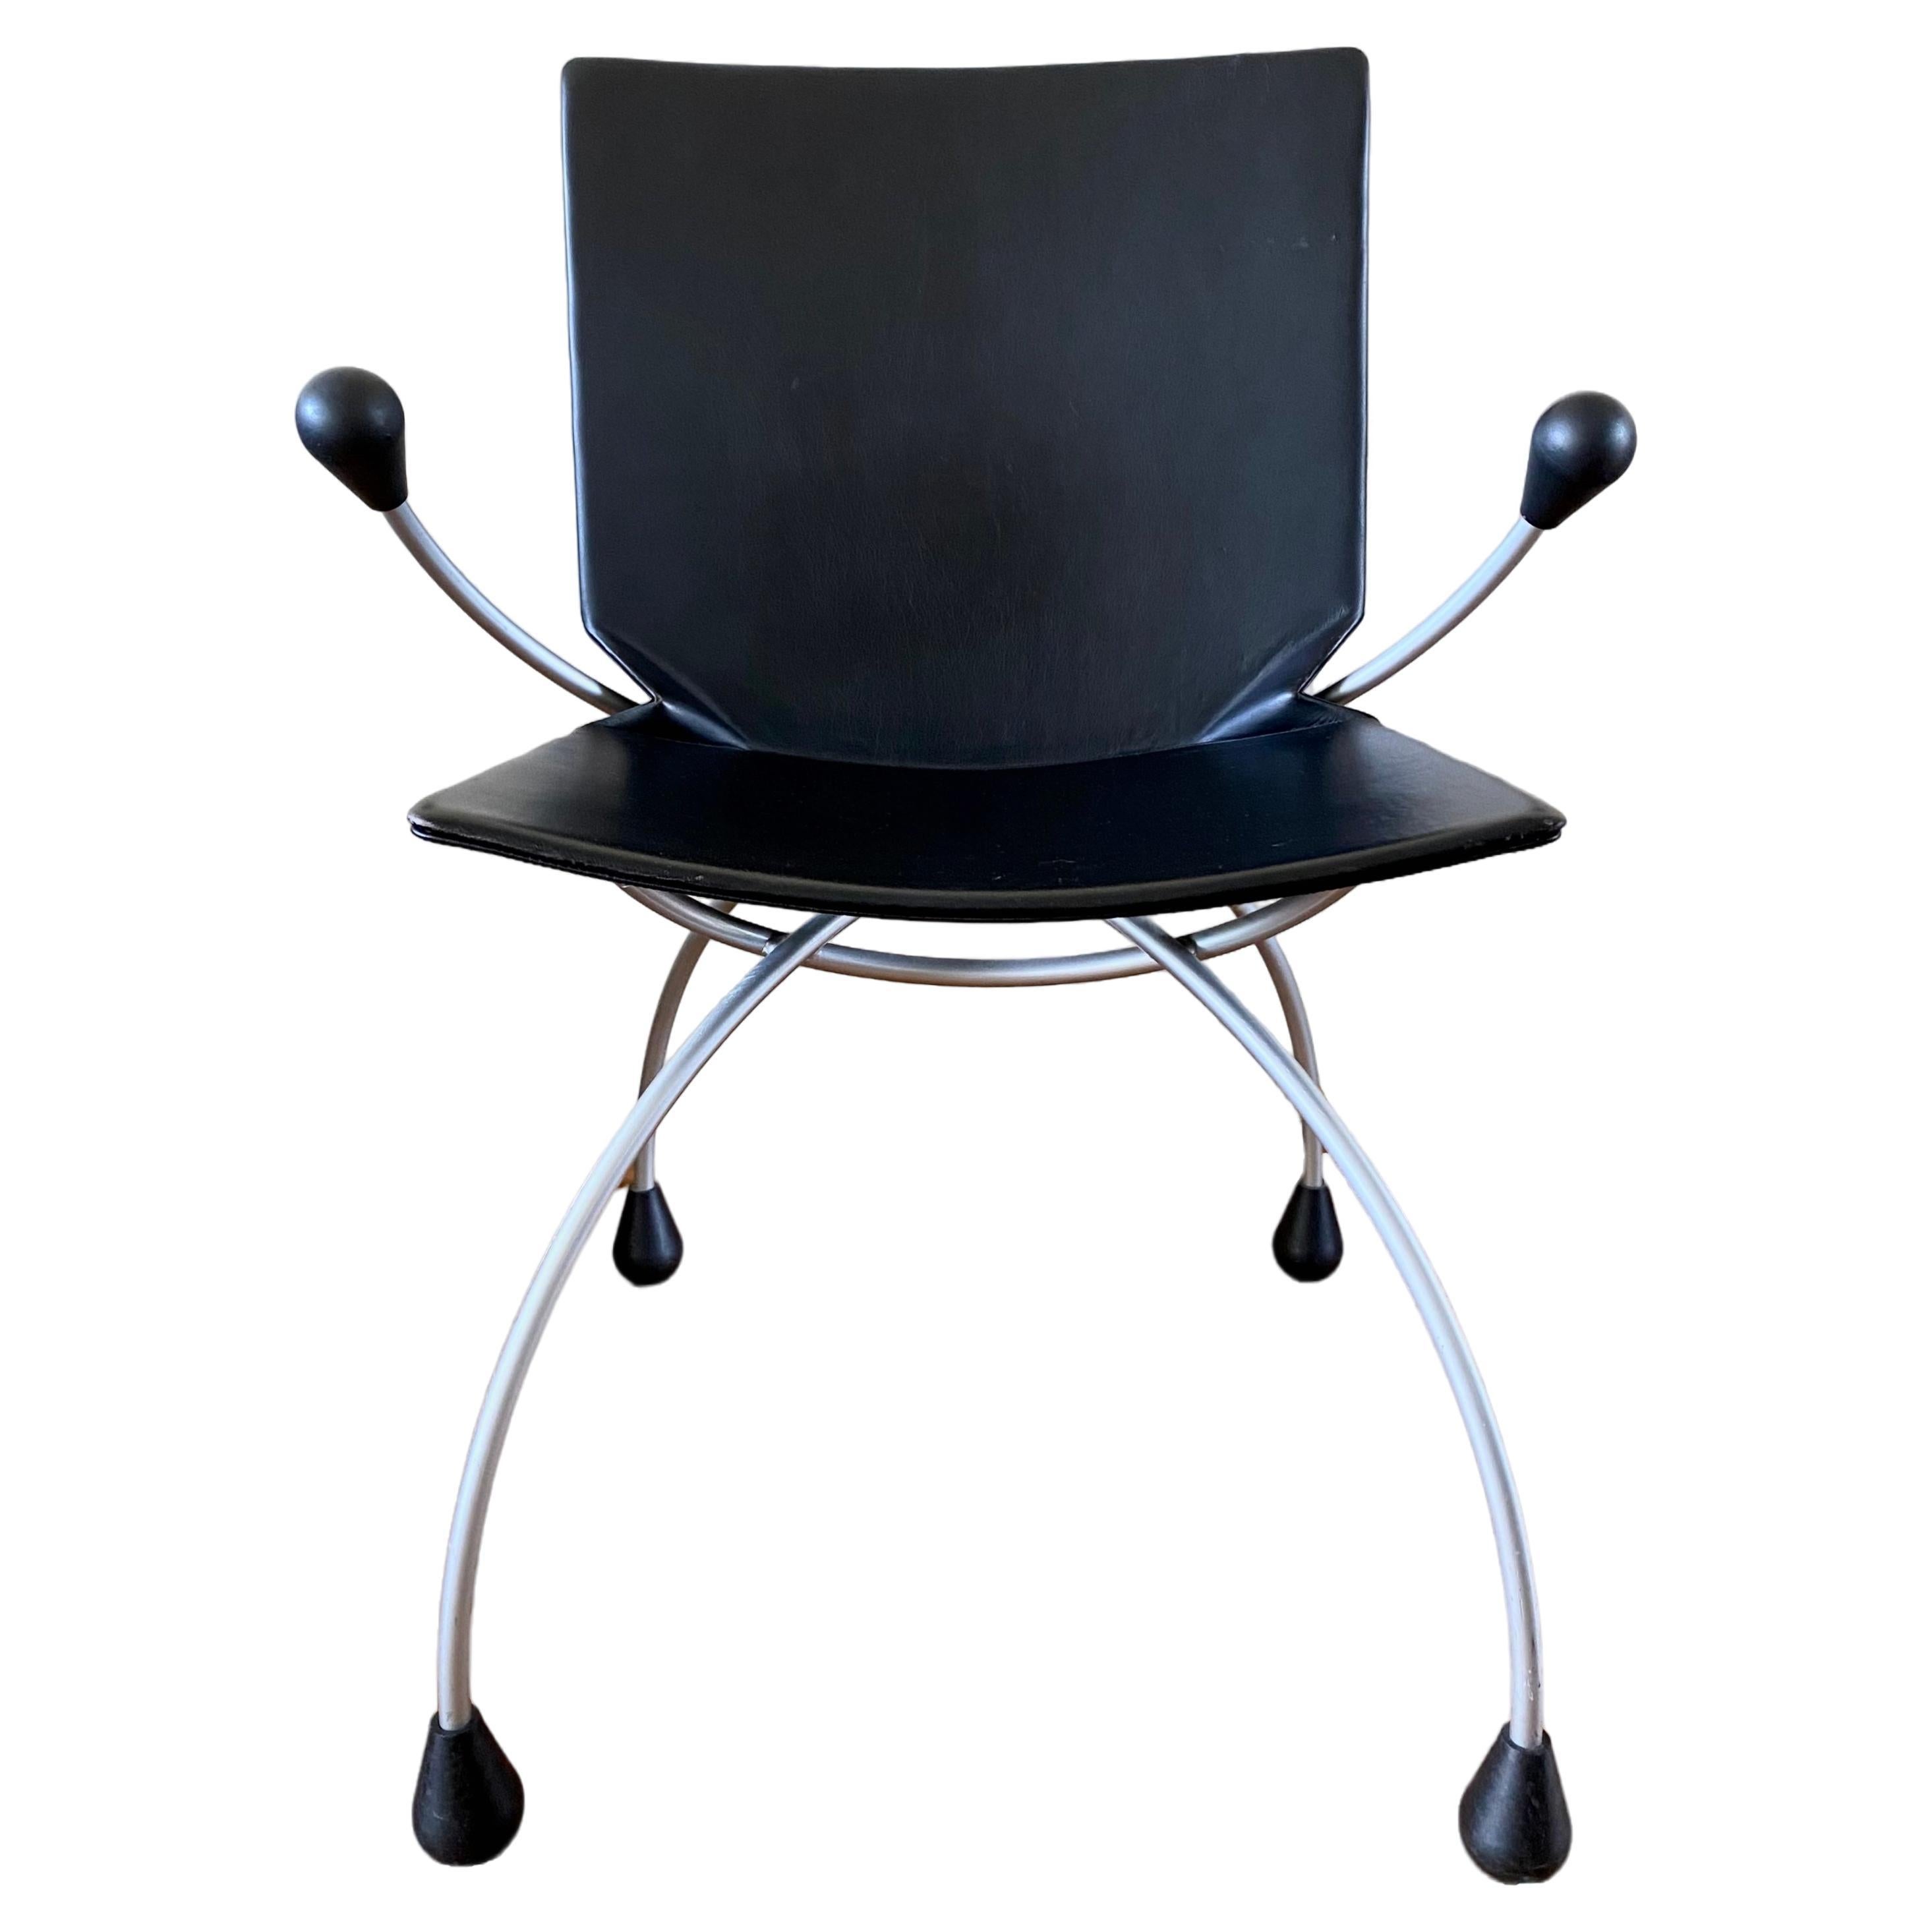 Black Leather chair by Karel Boonzaaier and Pierre Mazairac